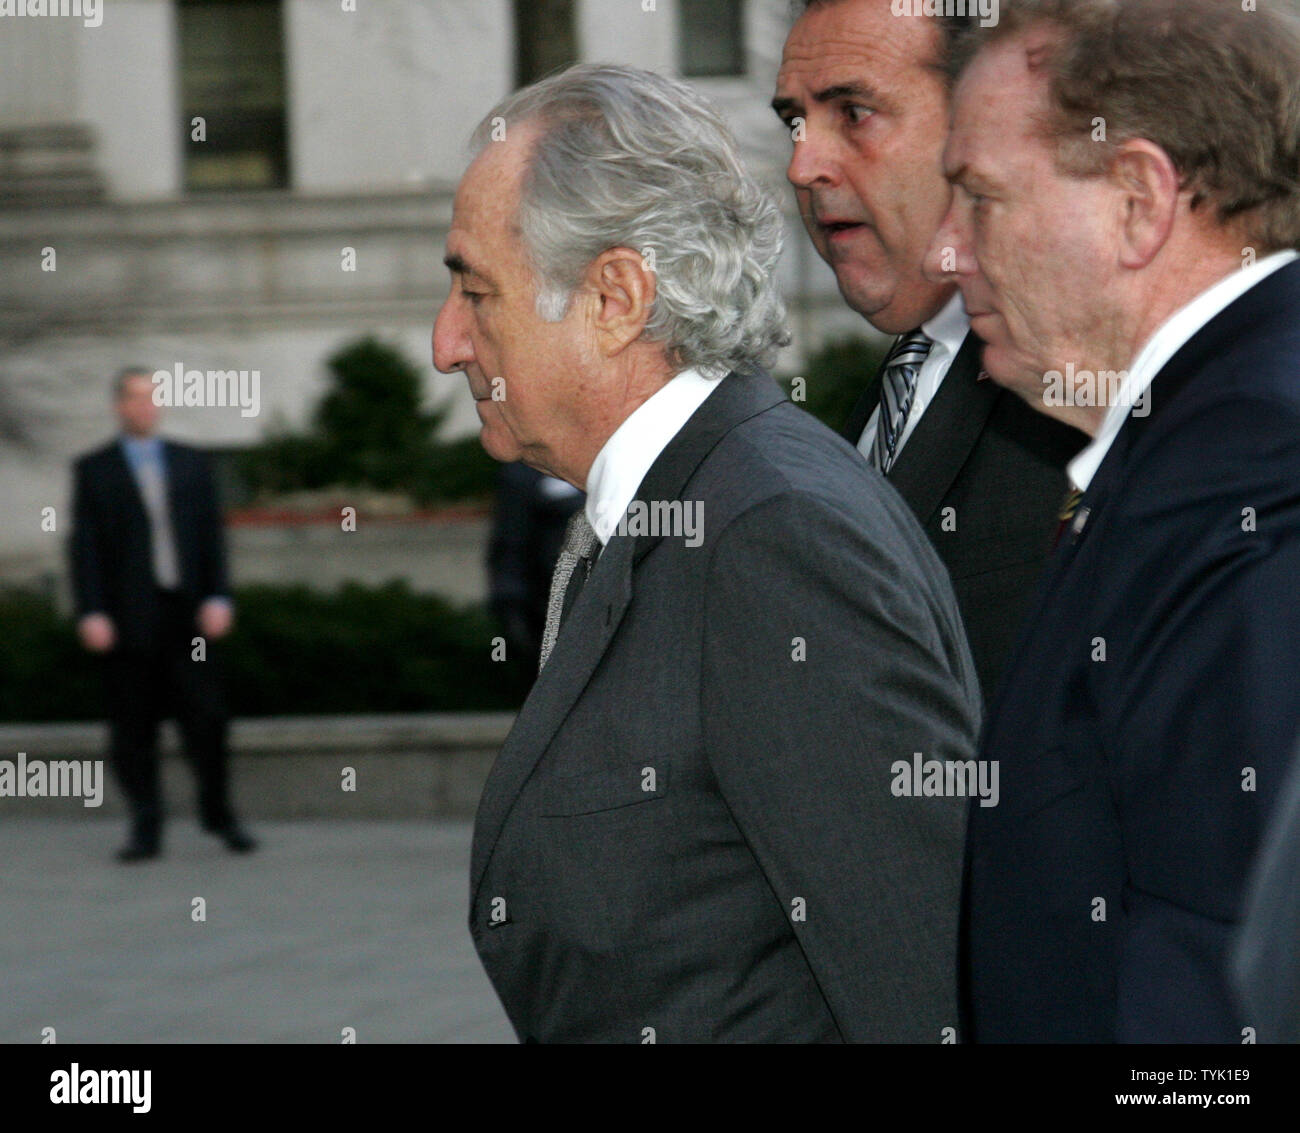 Bernard Madoff arrives at Federal Court where he is expected to plead guilty to securities fraud charges on March 12, 2009 in New York. Victims will also be in court to testify against the disgraced financier who is accused of masterminding a $50 billion Ponzi scheme. (UPI Photo/Monika Graff) Stock Photo